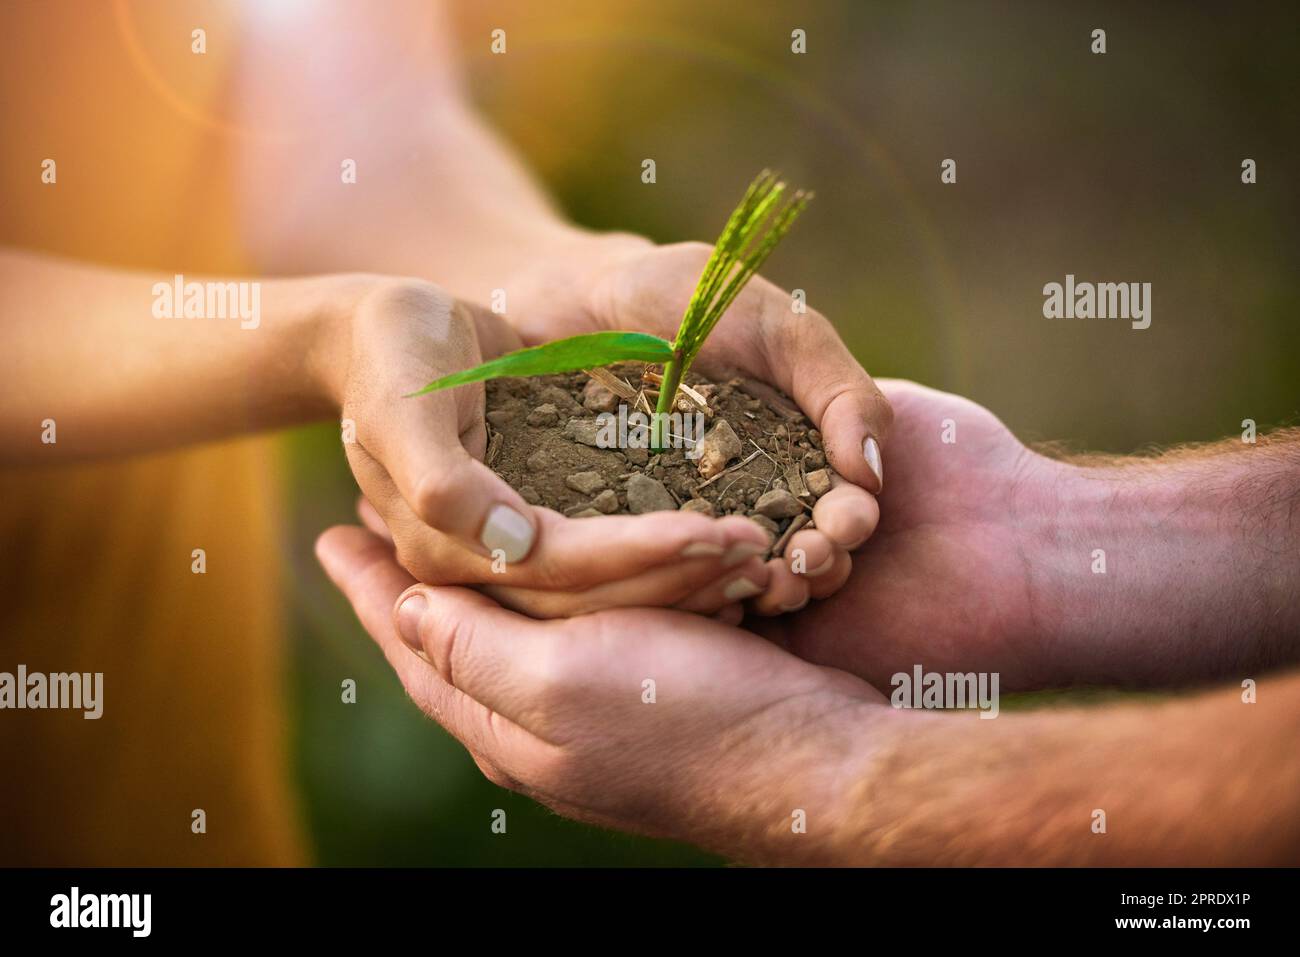 Caring people holding in hands a seed, plant and soil growth for environmental awareness conservation or sustainable development. Eco couple with small tree growing in hand for fertility or Earth Day Stock Photo